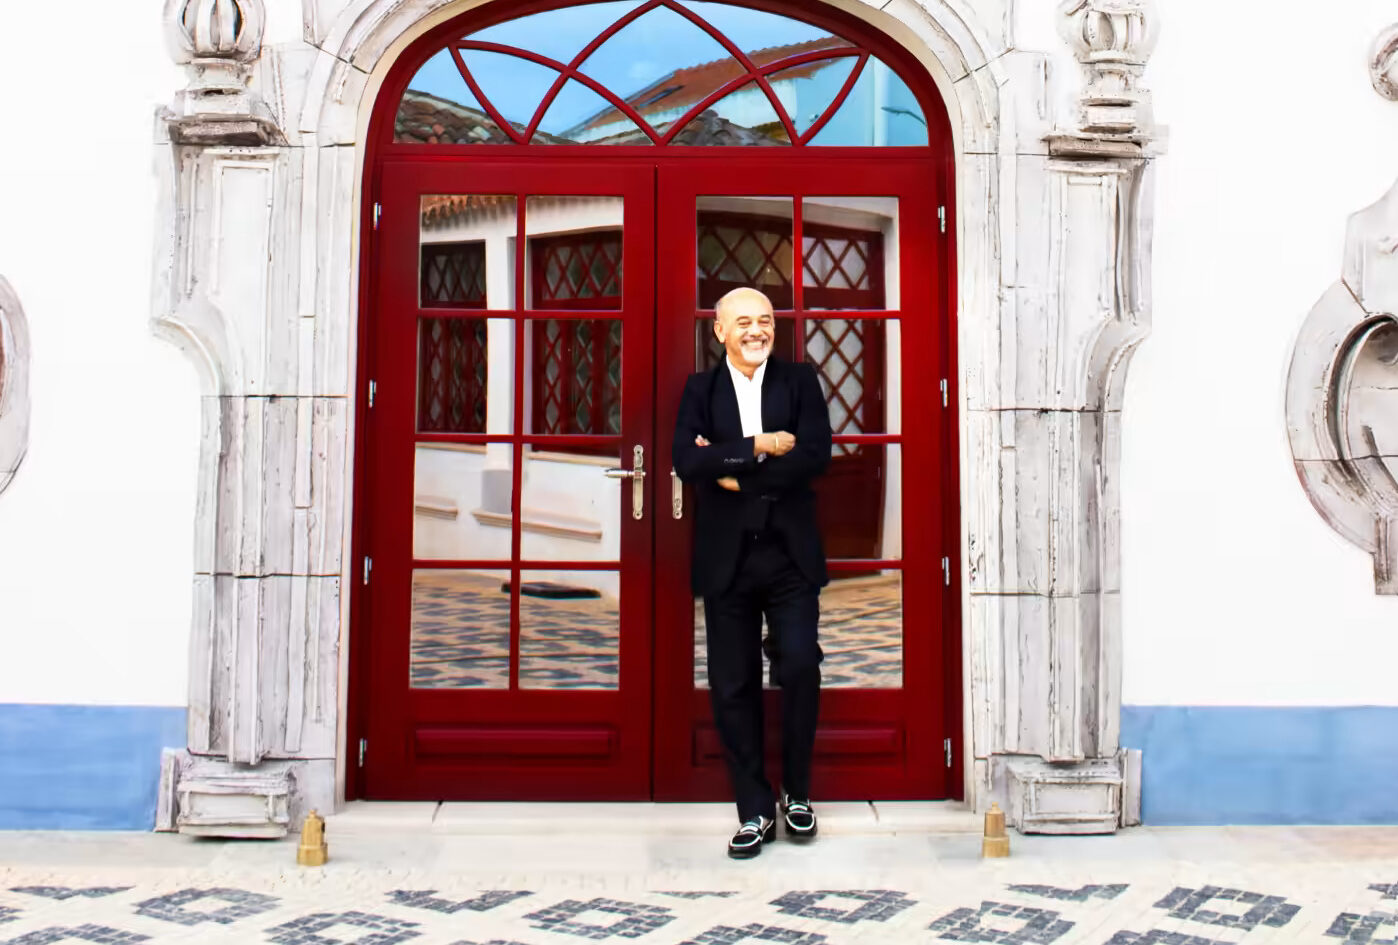 Christian Louboutain standing in front of his Hotel